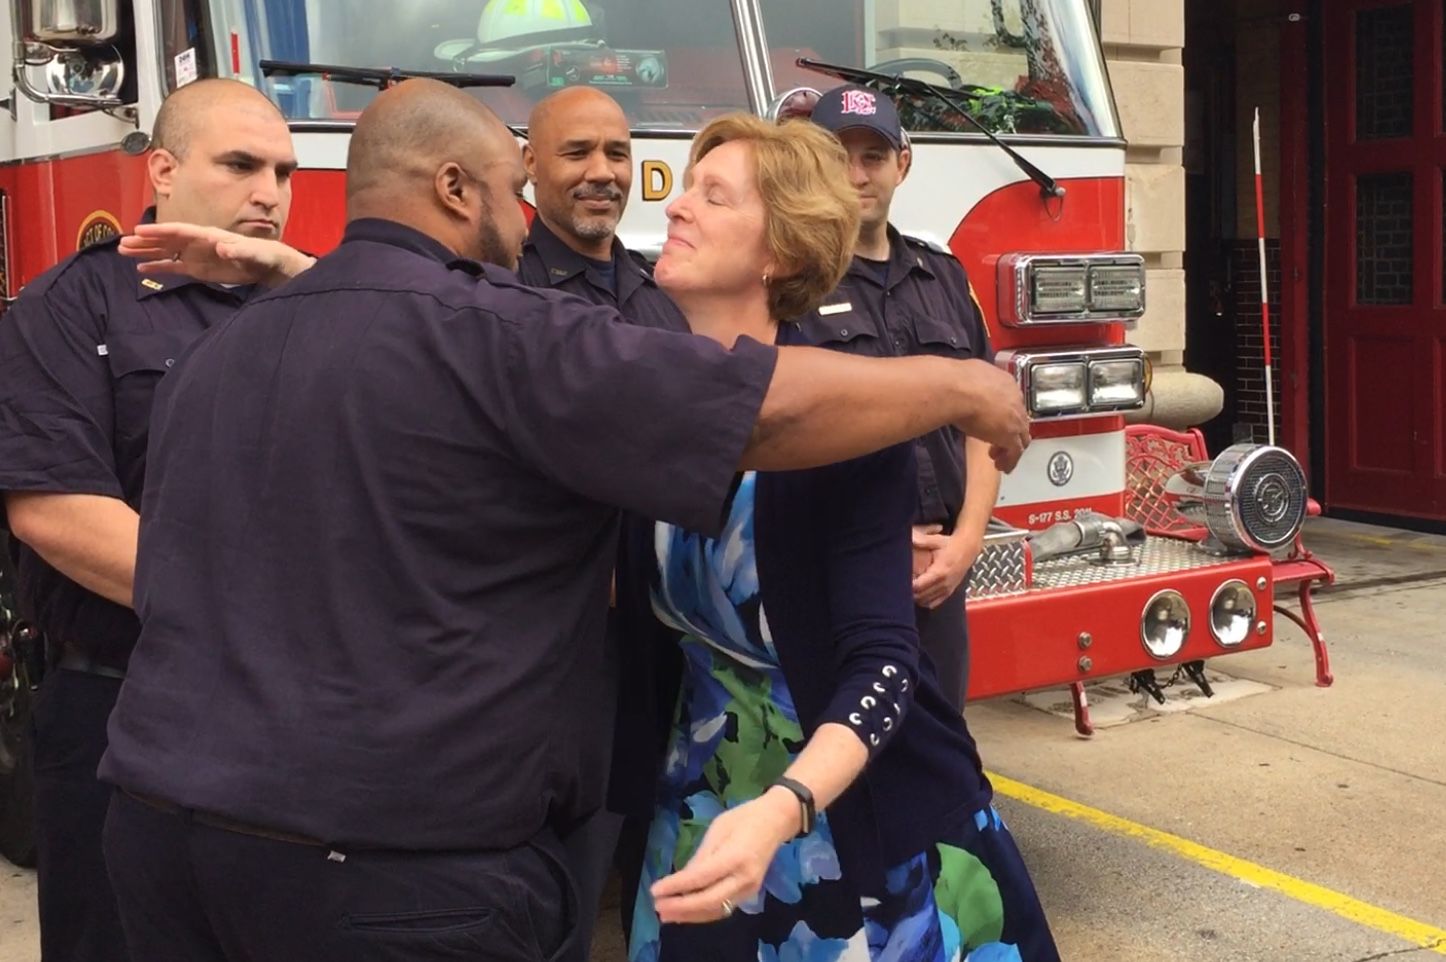 Victoria Wolf of Crofton, Maryland, thanks members of Engine Company 3 who responded when she went into cardiac arrest Aug. 14. (WTOP/Kristi King)